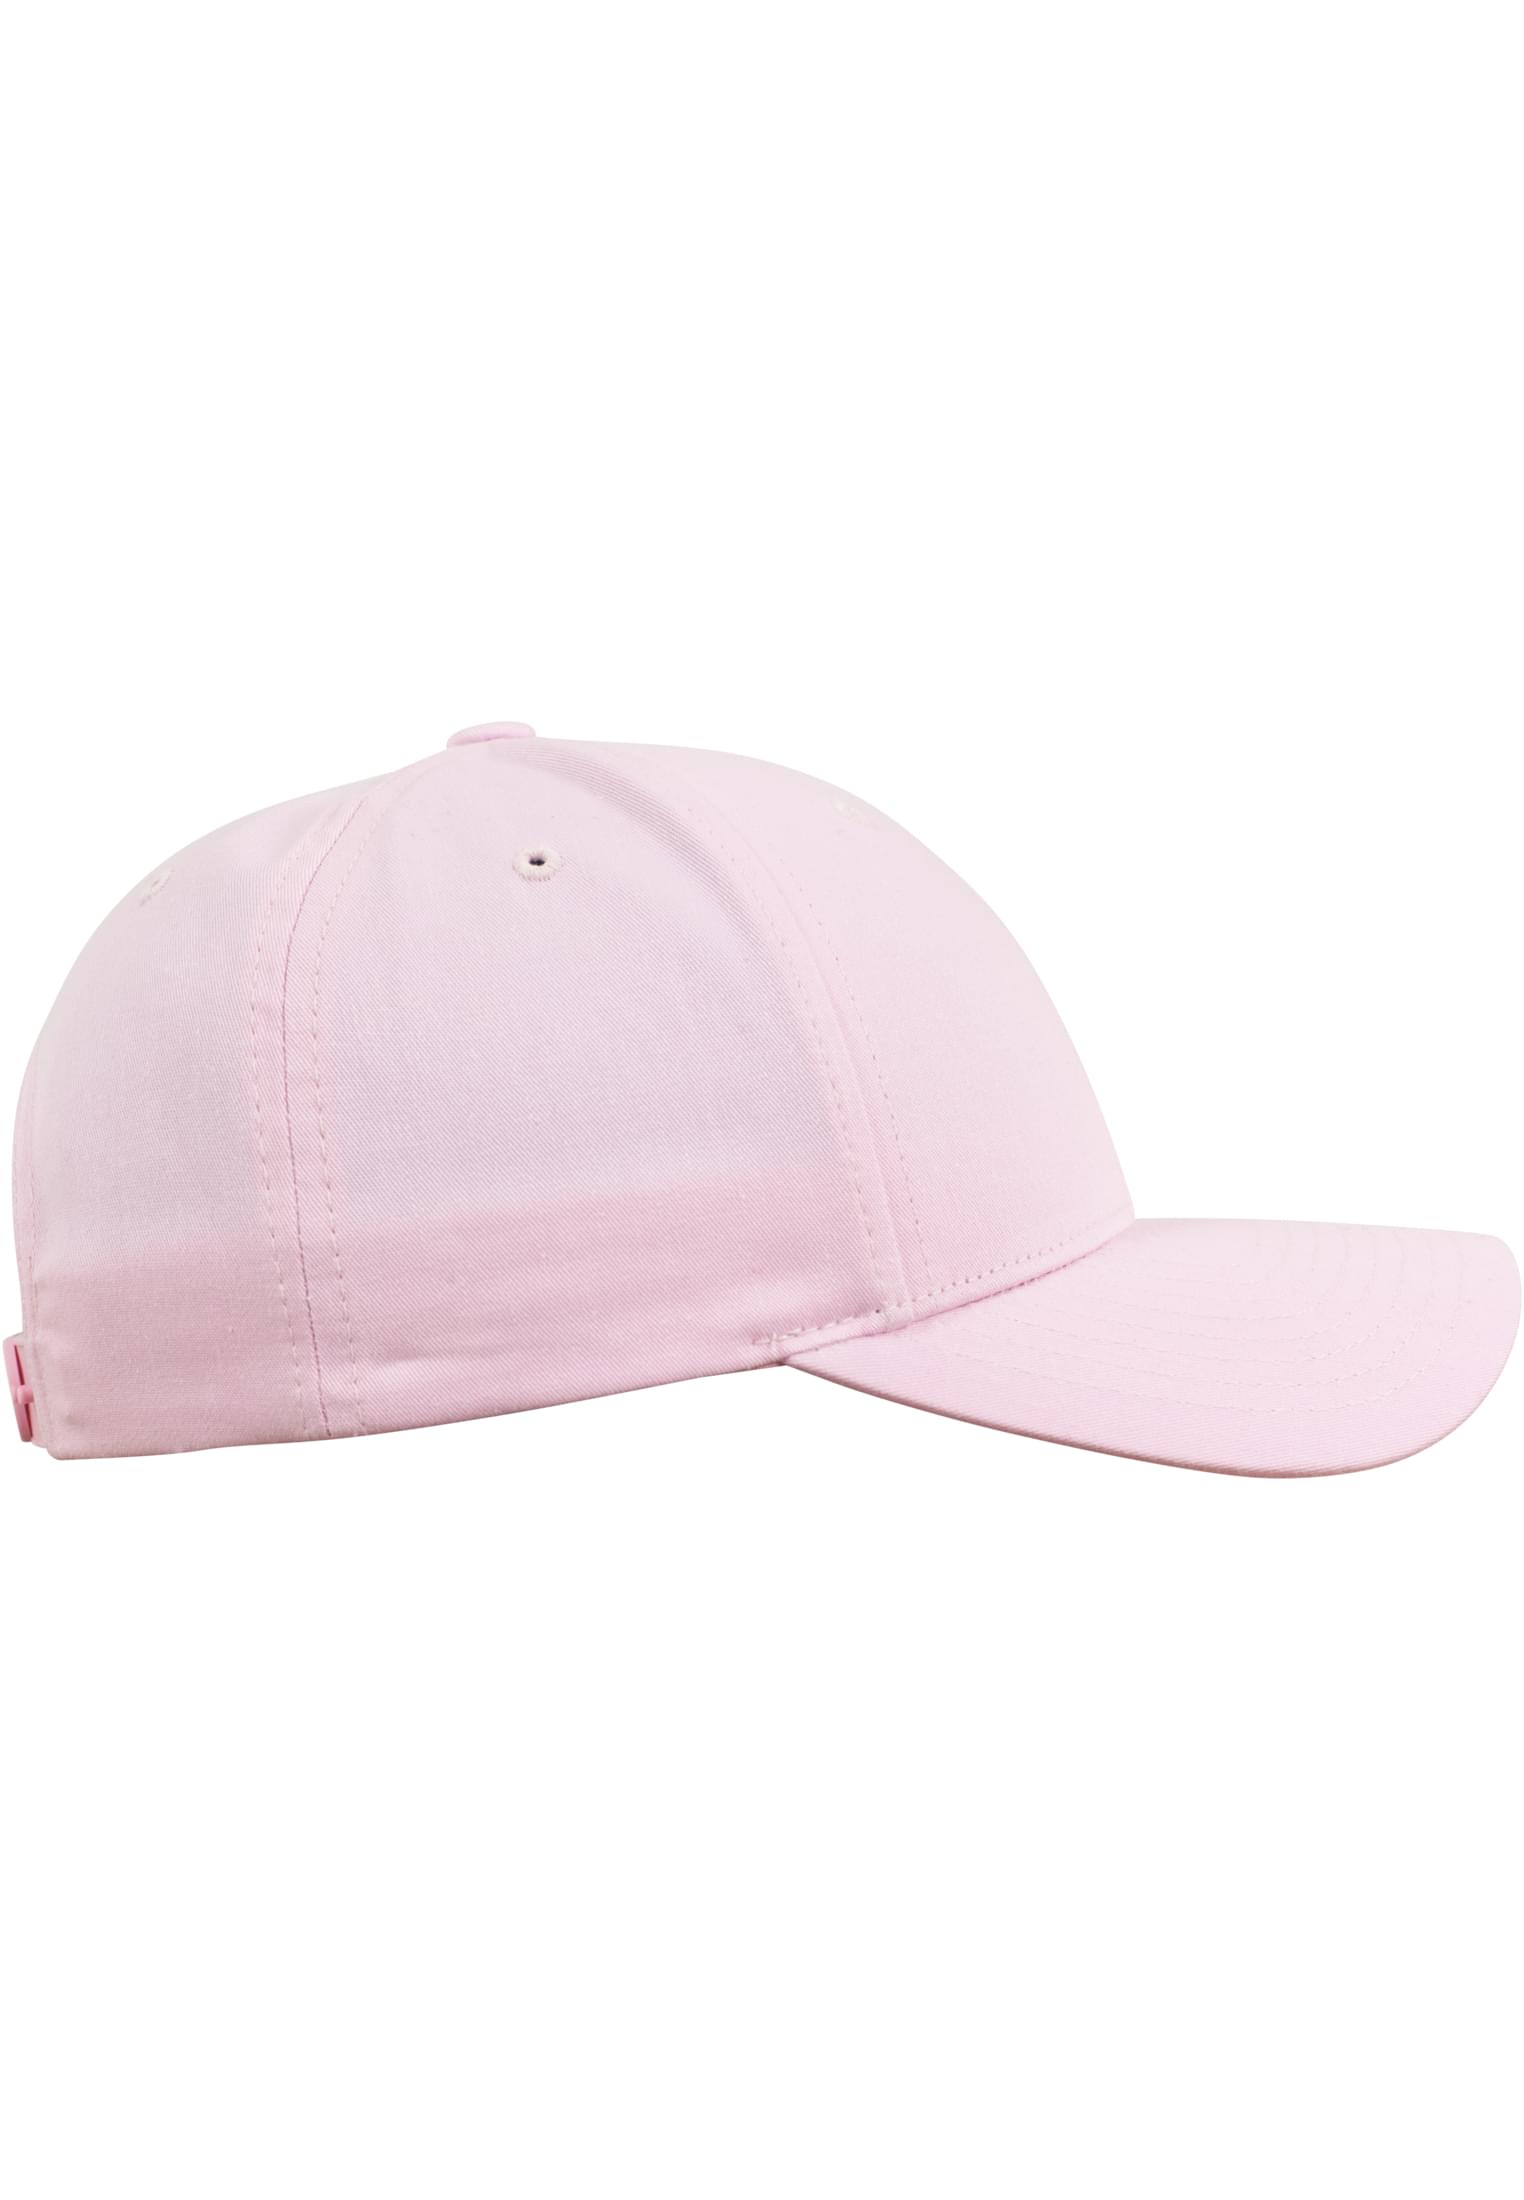 Snapback Curved Classic Snapback in Farbe pink